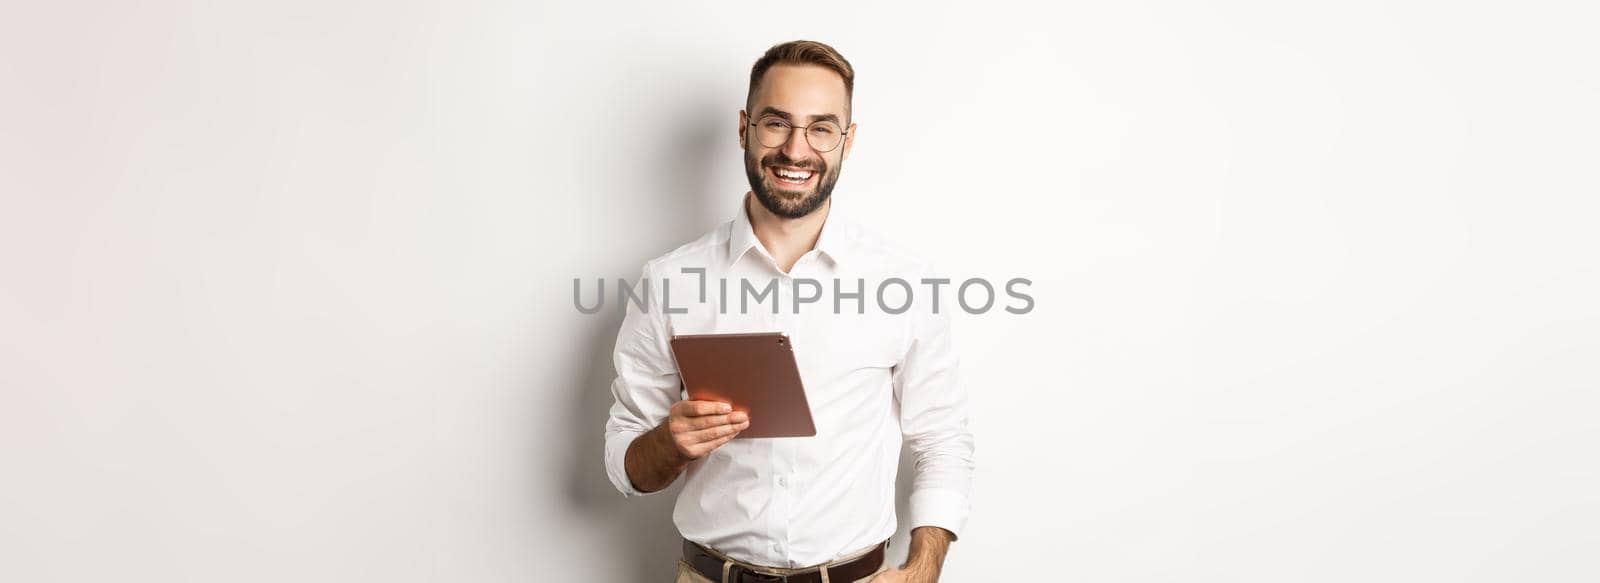 Confident business man holding digital tablet and smiling, standing against white background.